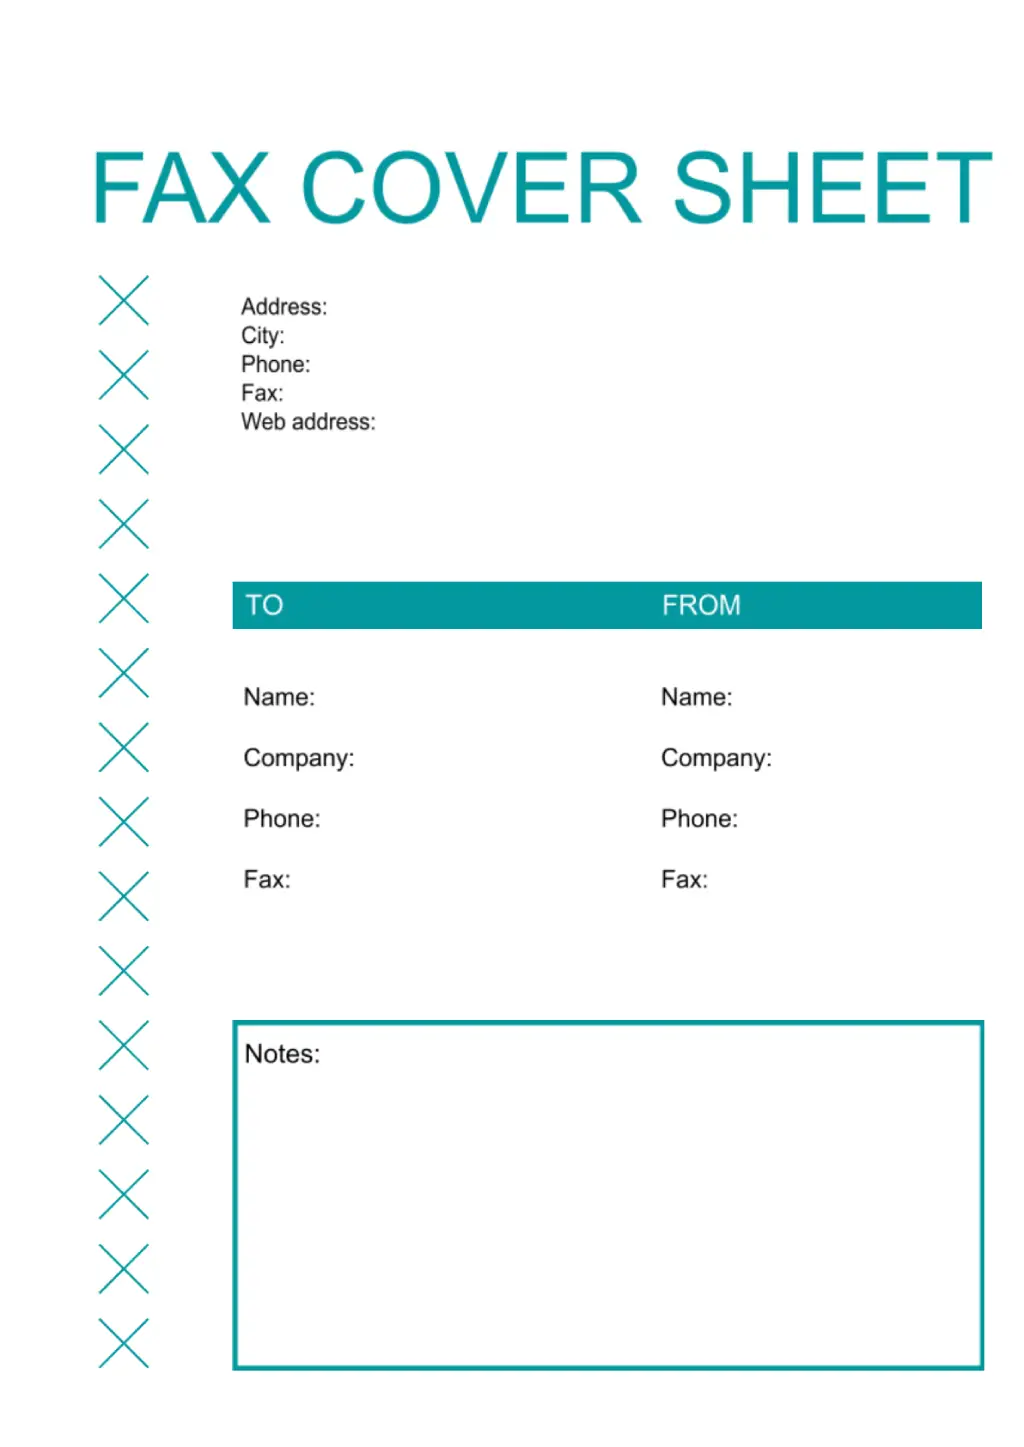 Fax Cover Sheet Template for Google Docs